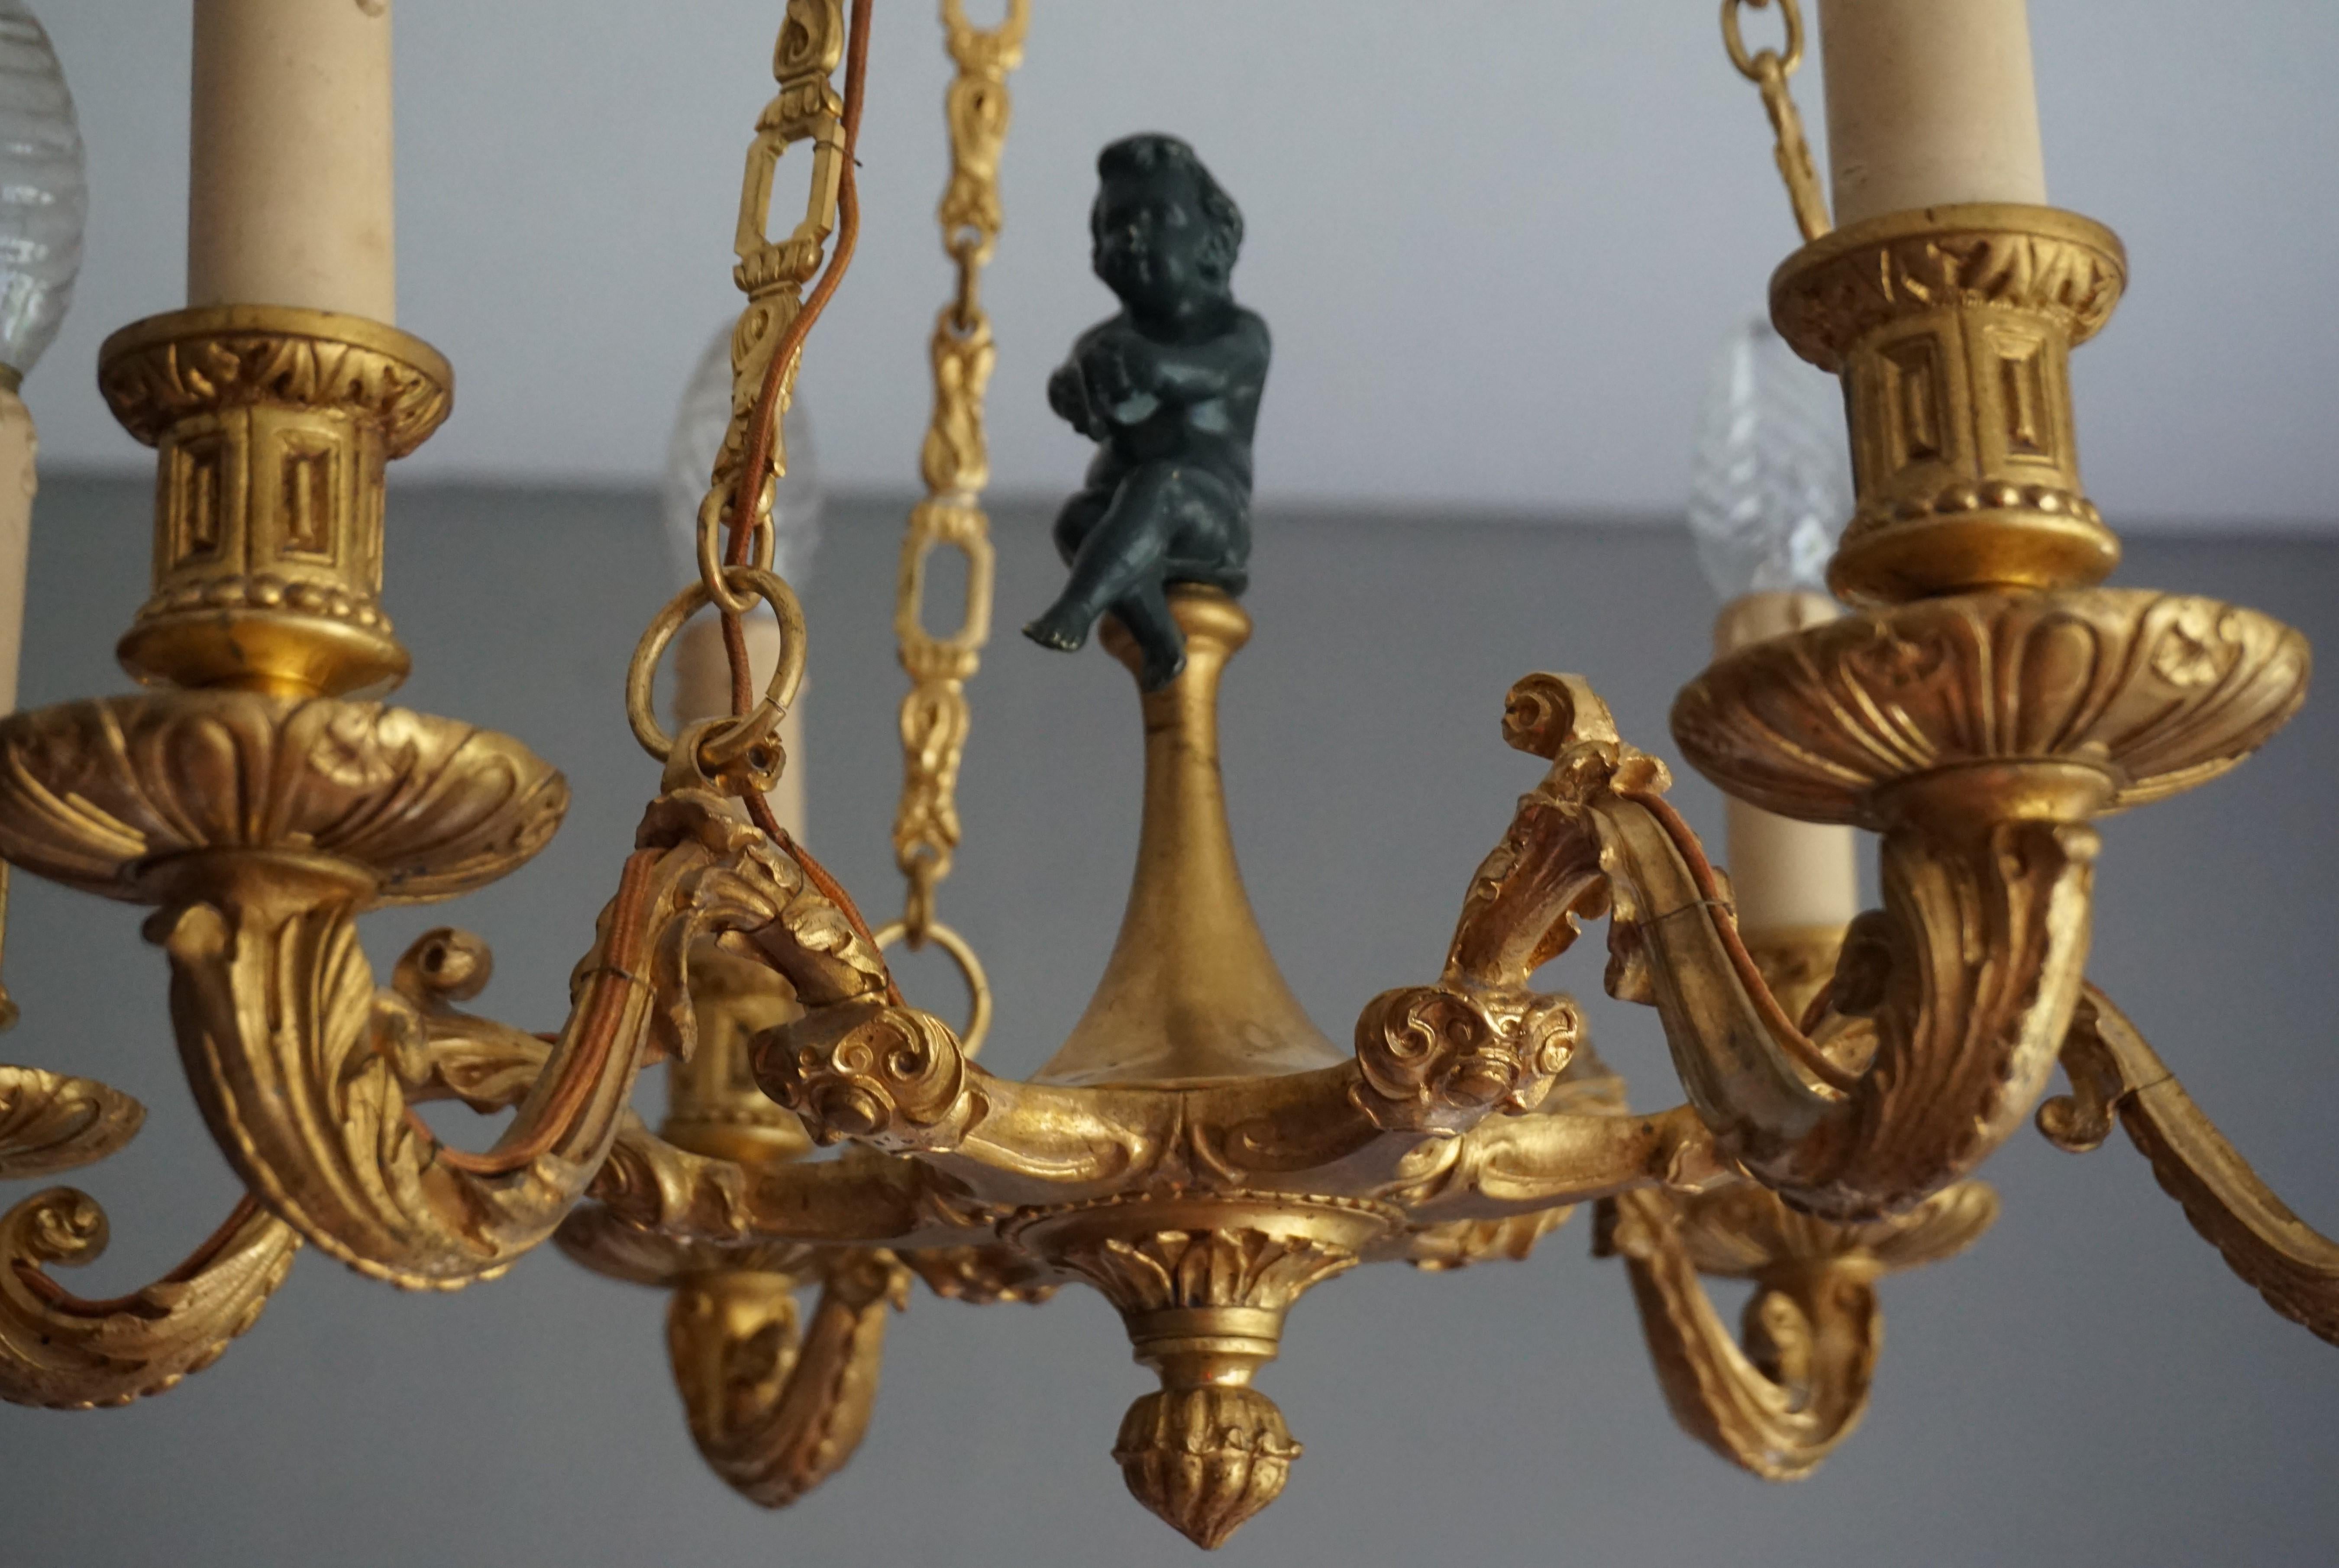 Stunning Little Gilt Bronze Chandelier with Scrolling Leafs and Putto Sculpture For Sale 3